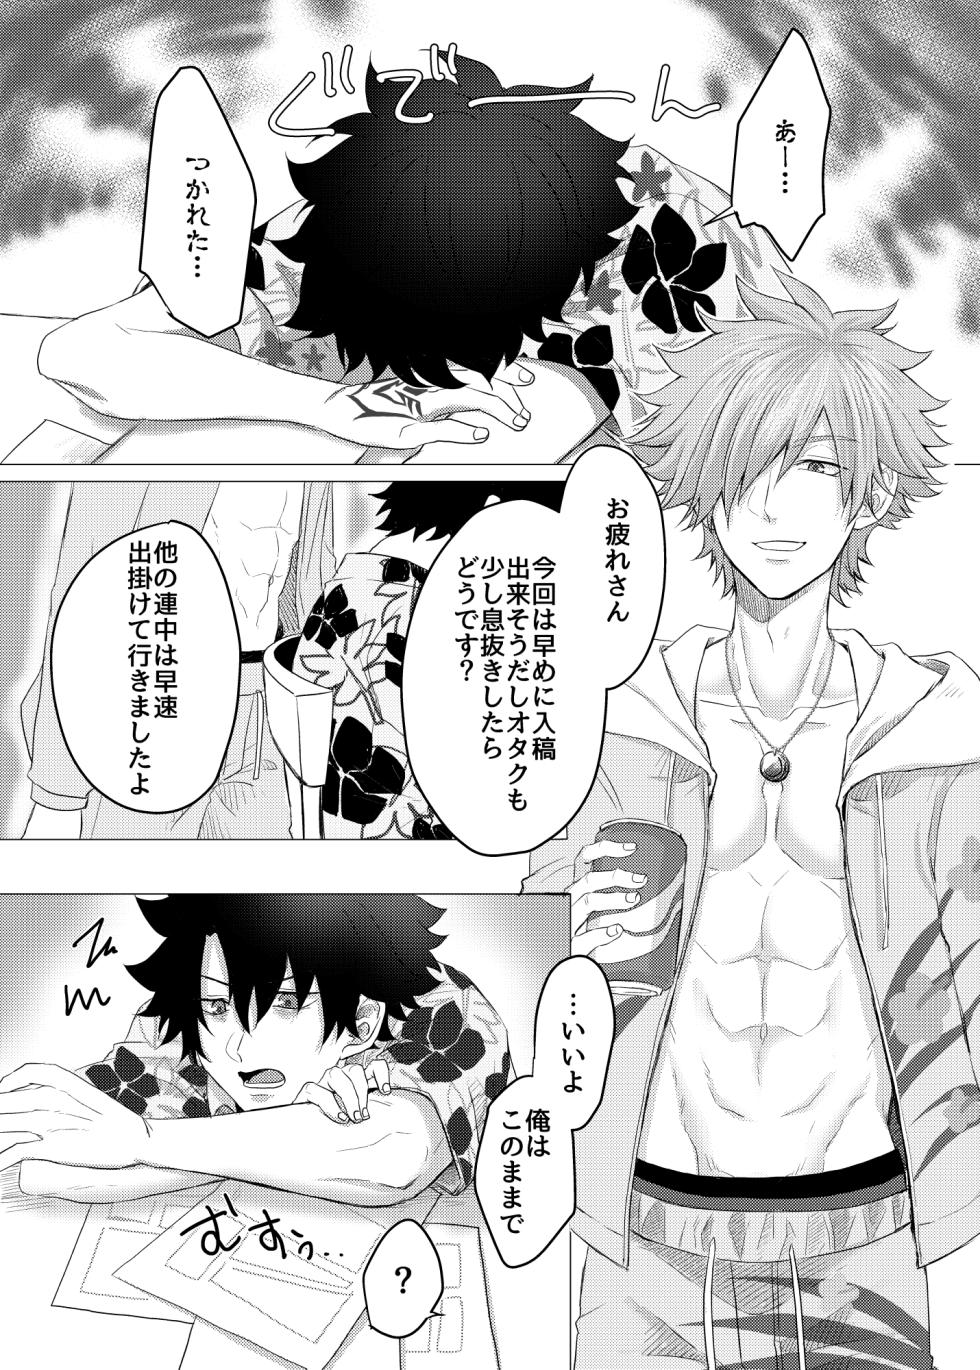 [about (No. 6)] Luluhawa Onii-san to Issho♥ (Fate/Grand Order) [Digital] - Page 3